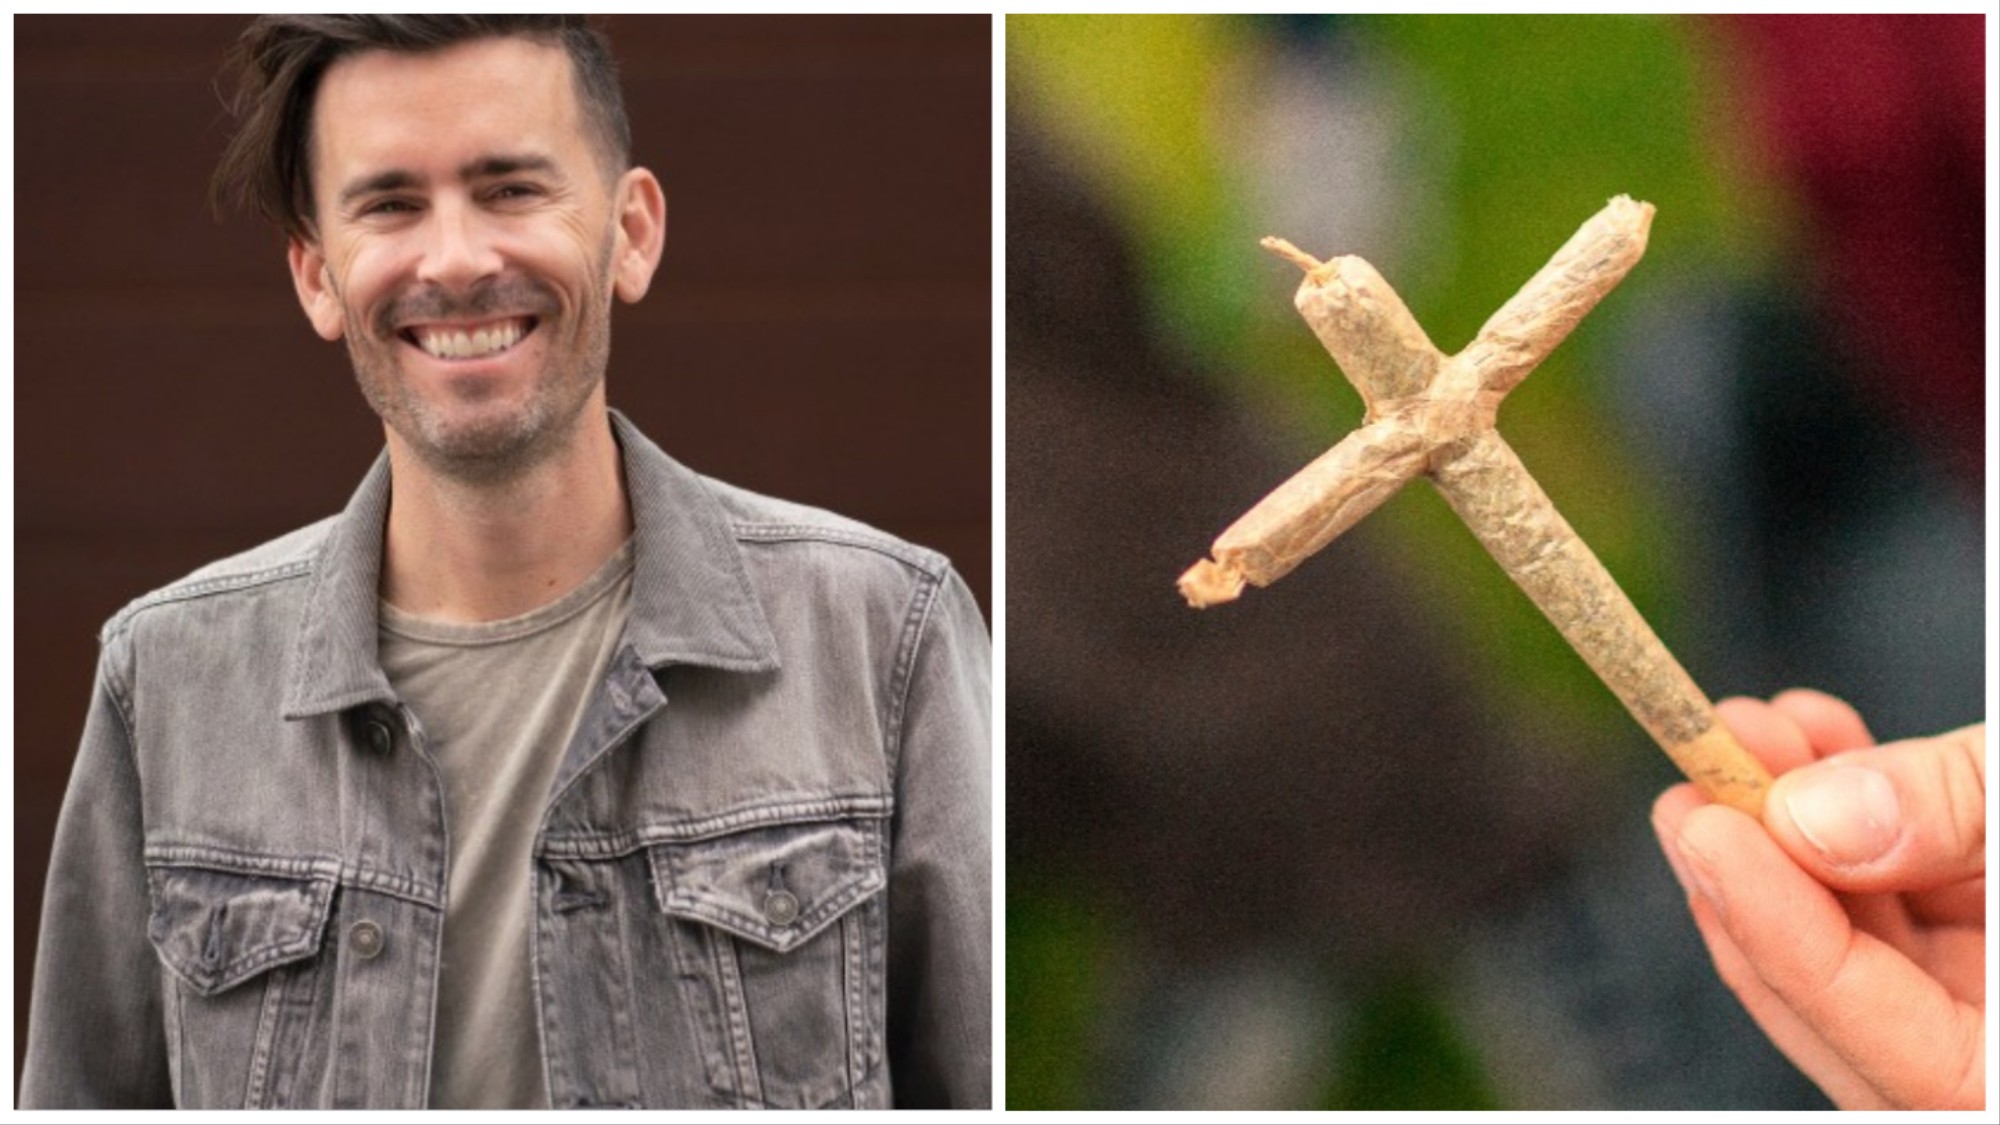 Porn Stars Smoking Pot - Jesus Would Have Been Cool with Weed, Says 'Christian ...